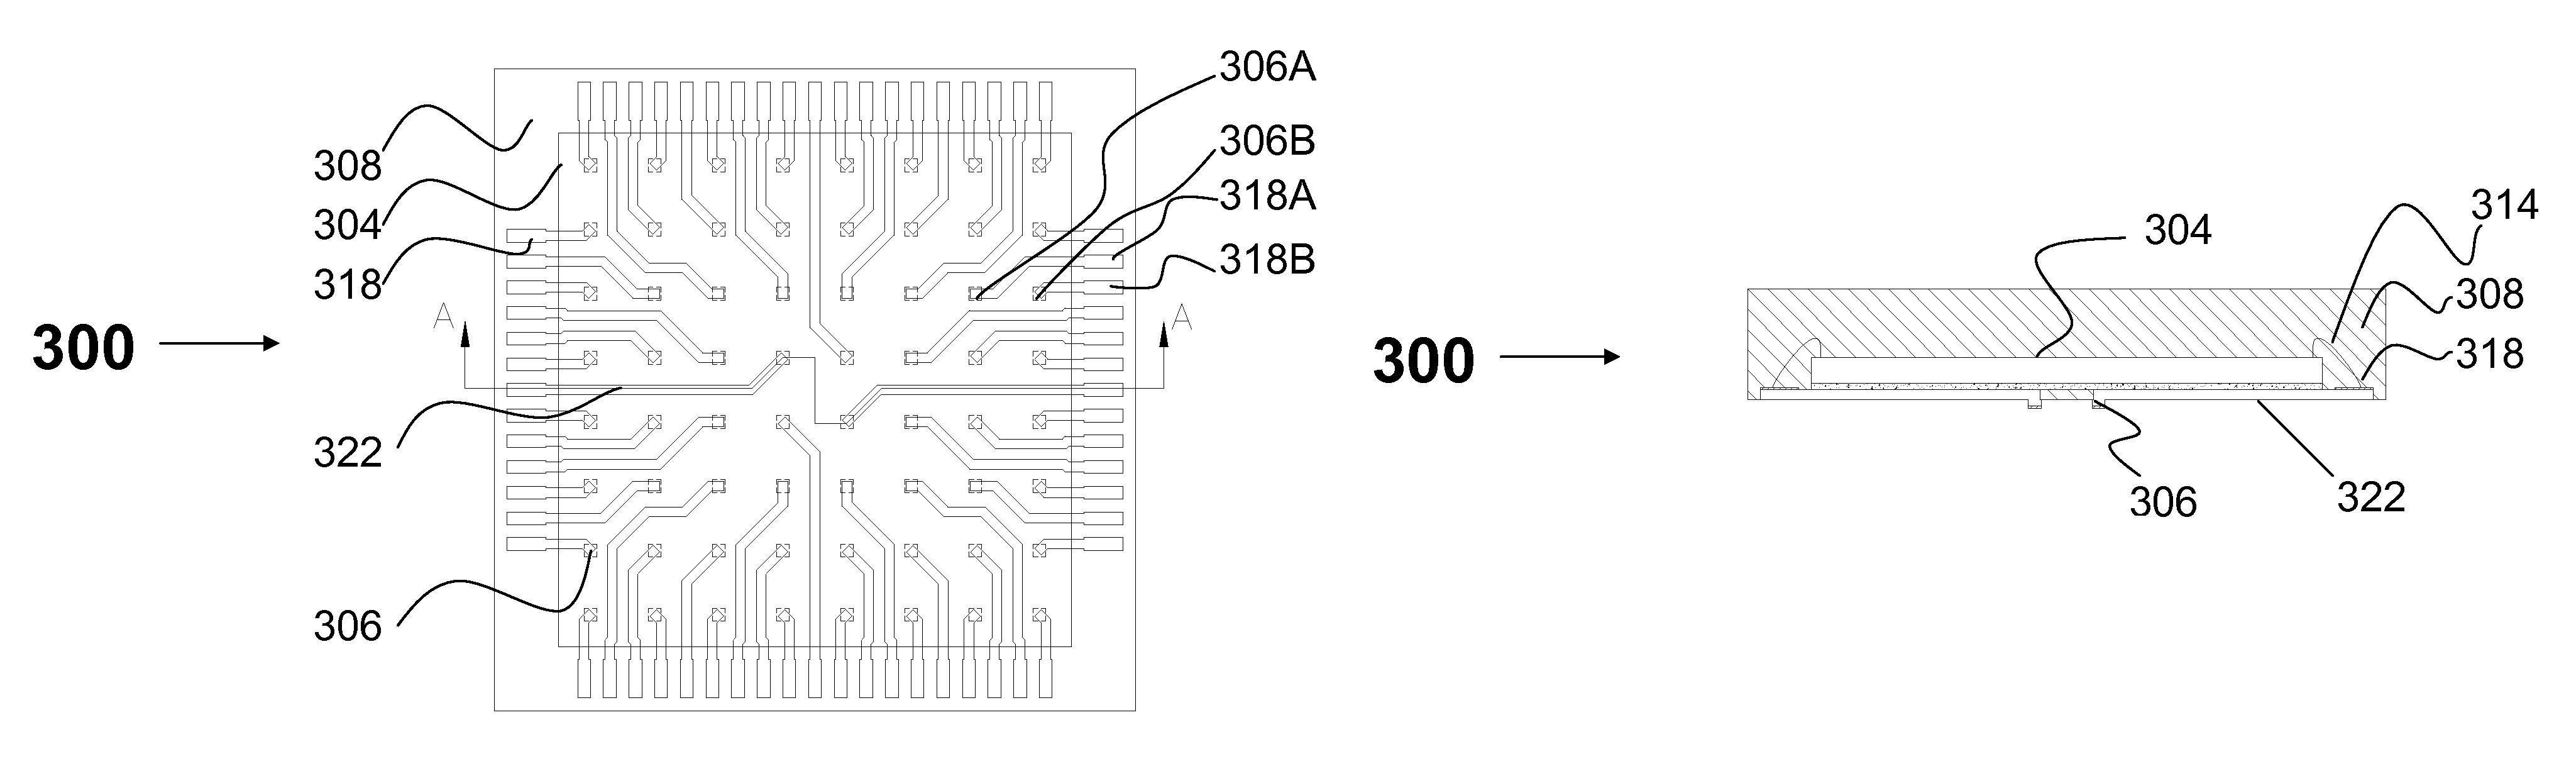 Leadless integrated circuit package having electrically routed contacts